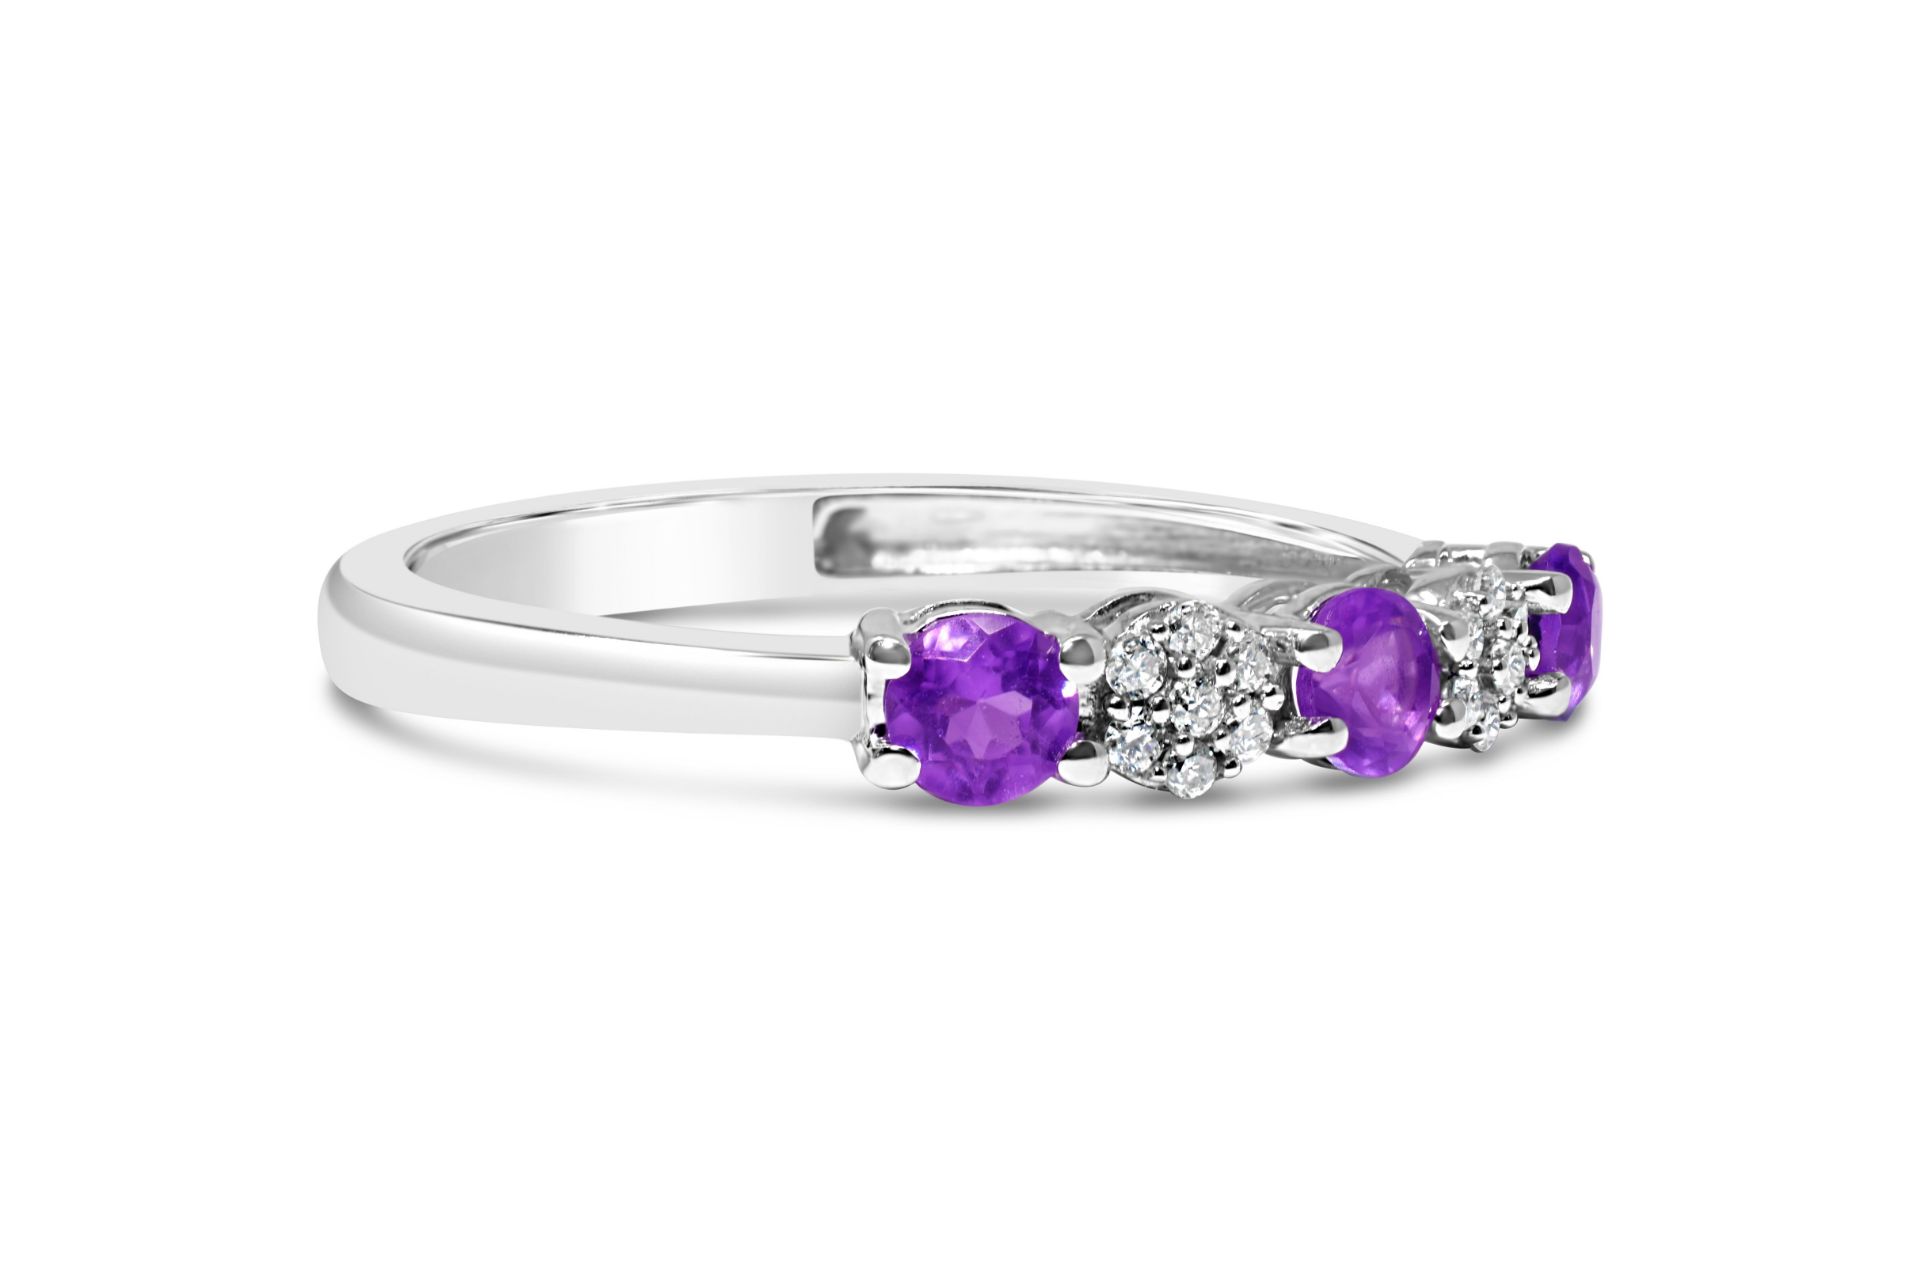 Amethyst and Diamond Eternity Ring, 9ct White Gold RRP £749 Weight 1.48g, Diamond Weight 0.07ct,